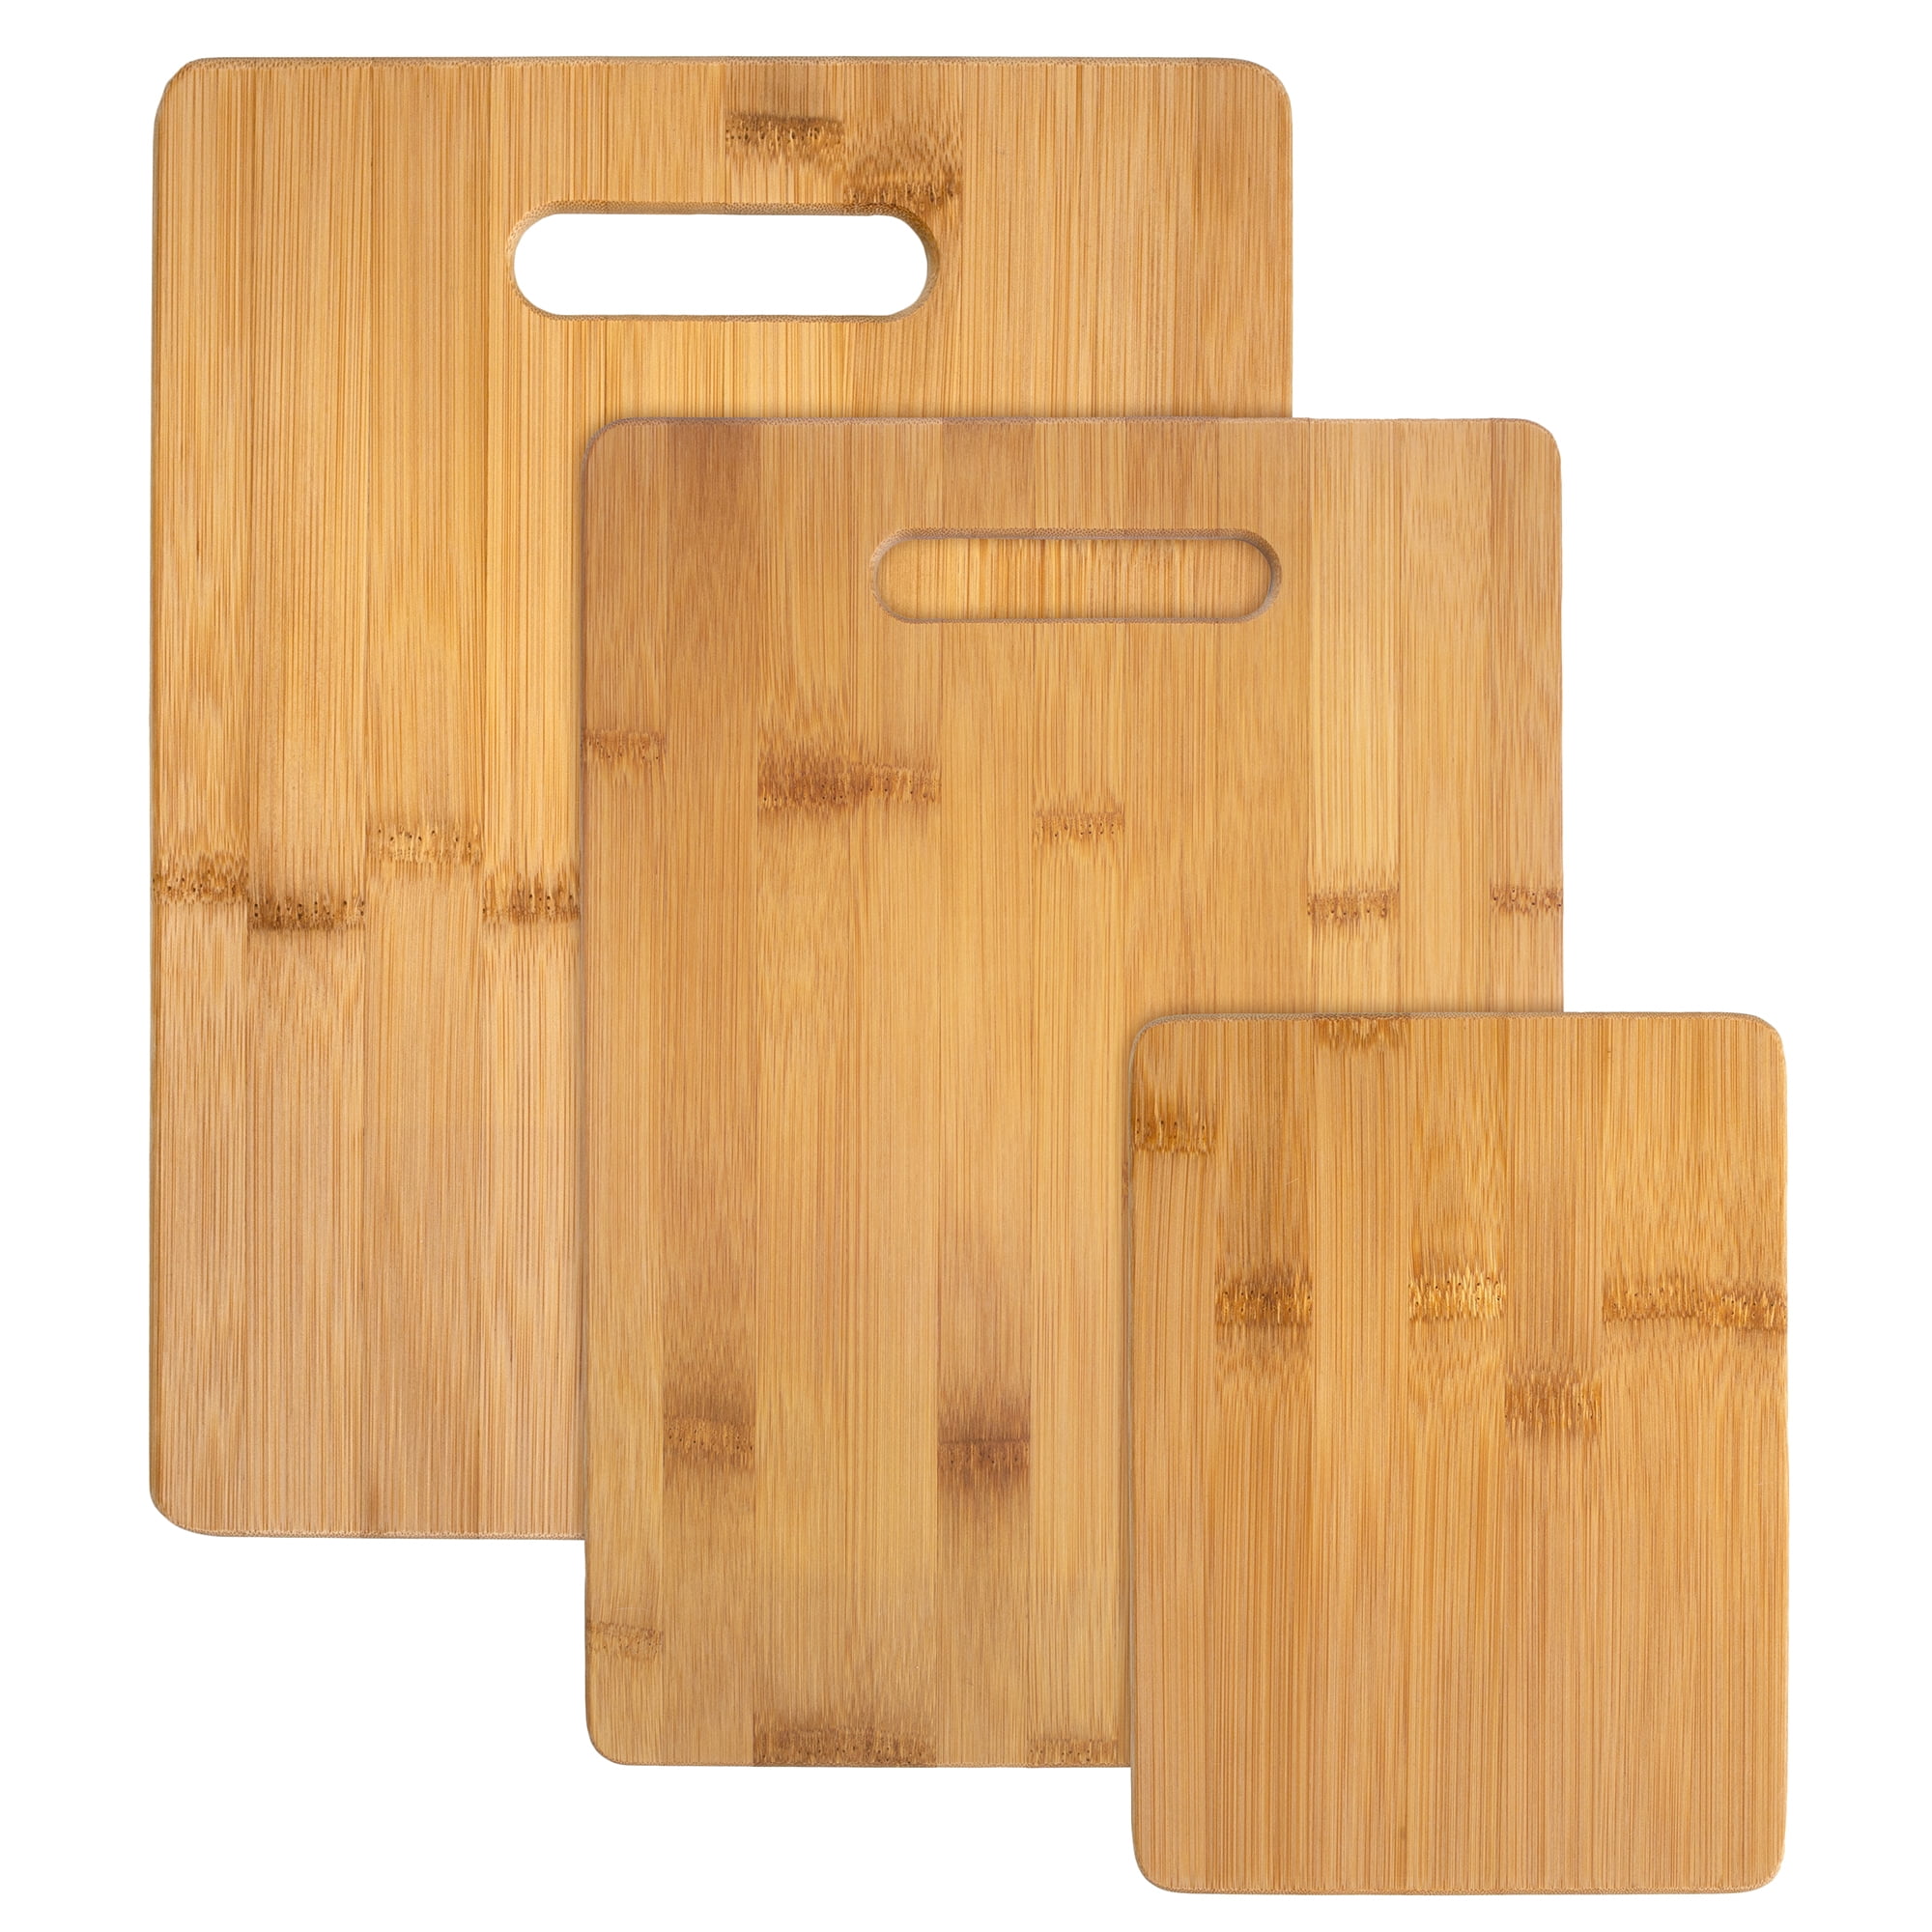 Oneida Bamboo Cutting Board with Santoku Knife, Housewares, Electronics,  Vacuums, Cookware, Tools, Furniture, Exercise Equipment & More - IN  BURNSVILLE MN